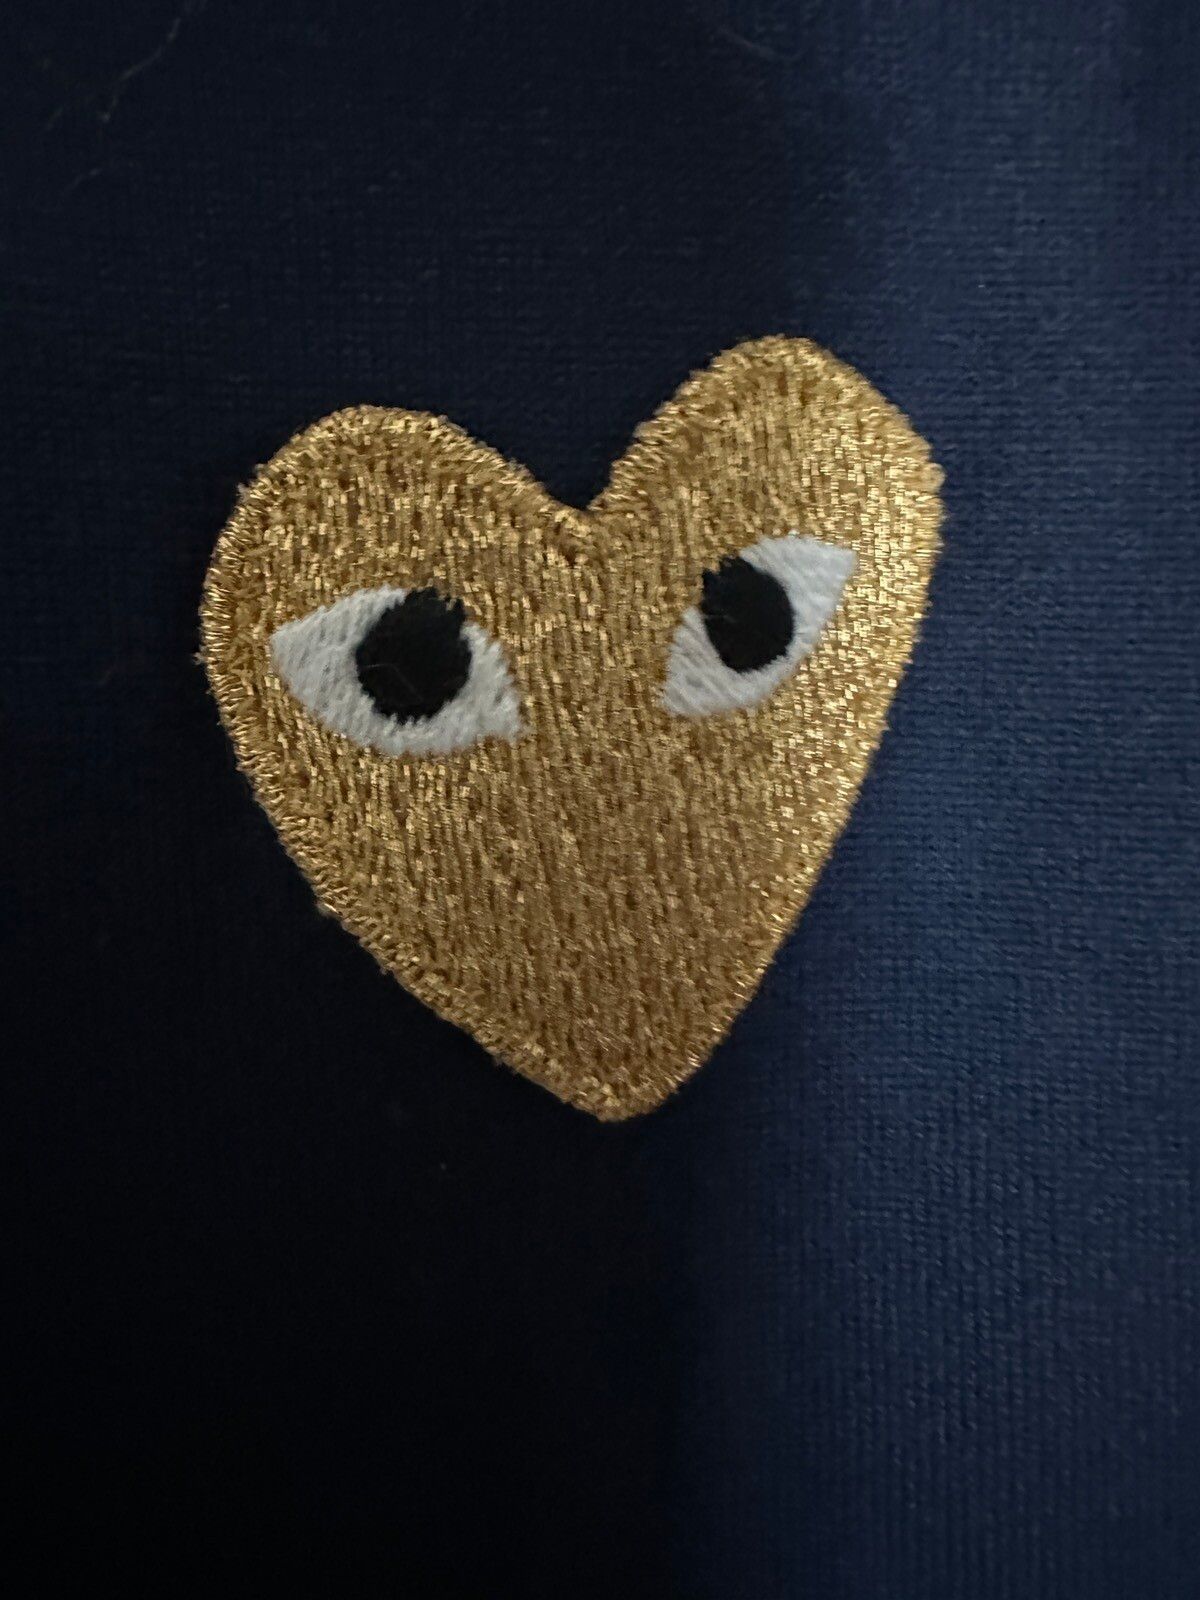 Comme Des Garcons Play CDG Play Short Sleeve Navy T-Shirt Gold logo Size US XL / EU 56 / 4 - 2 Preview